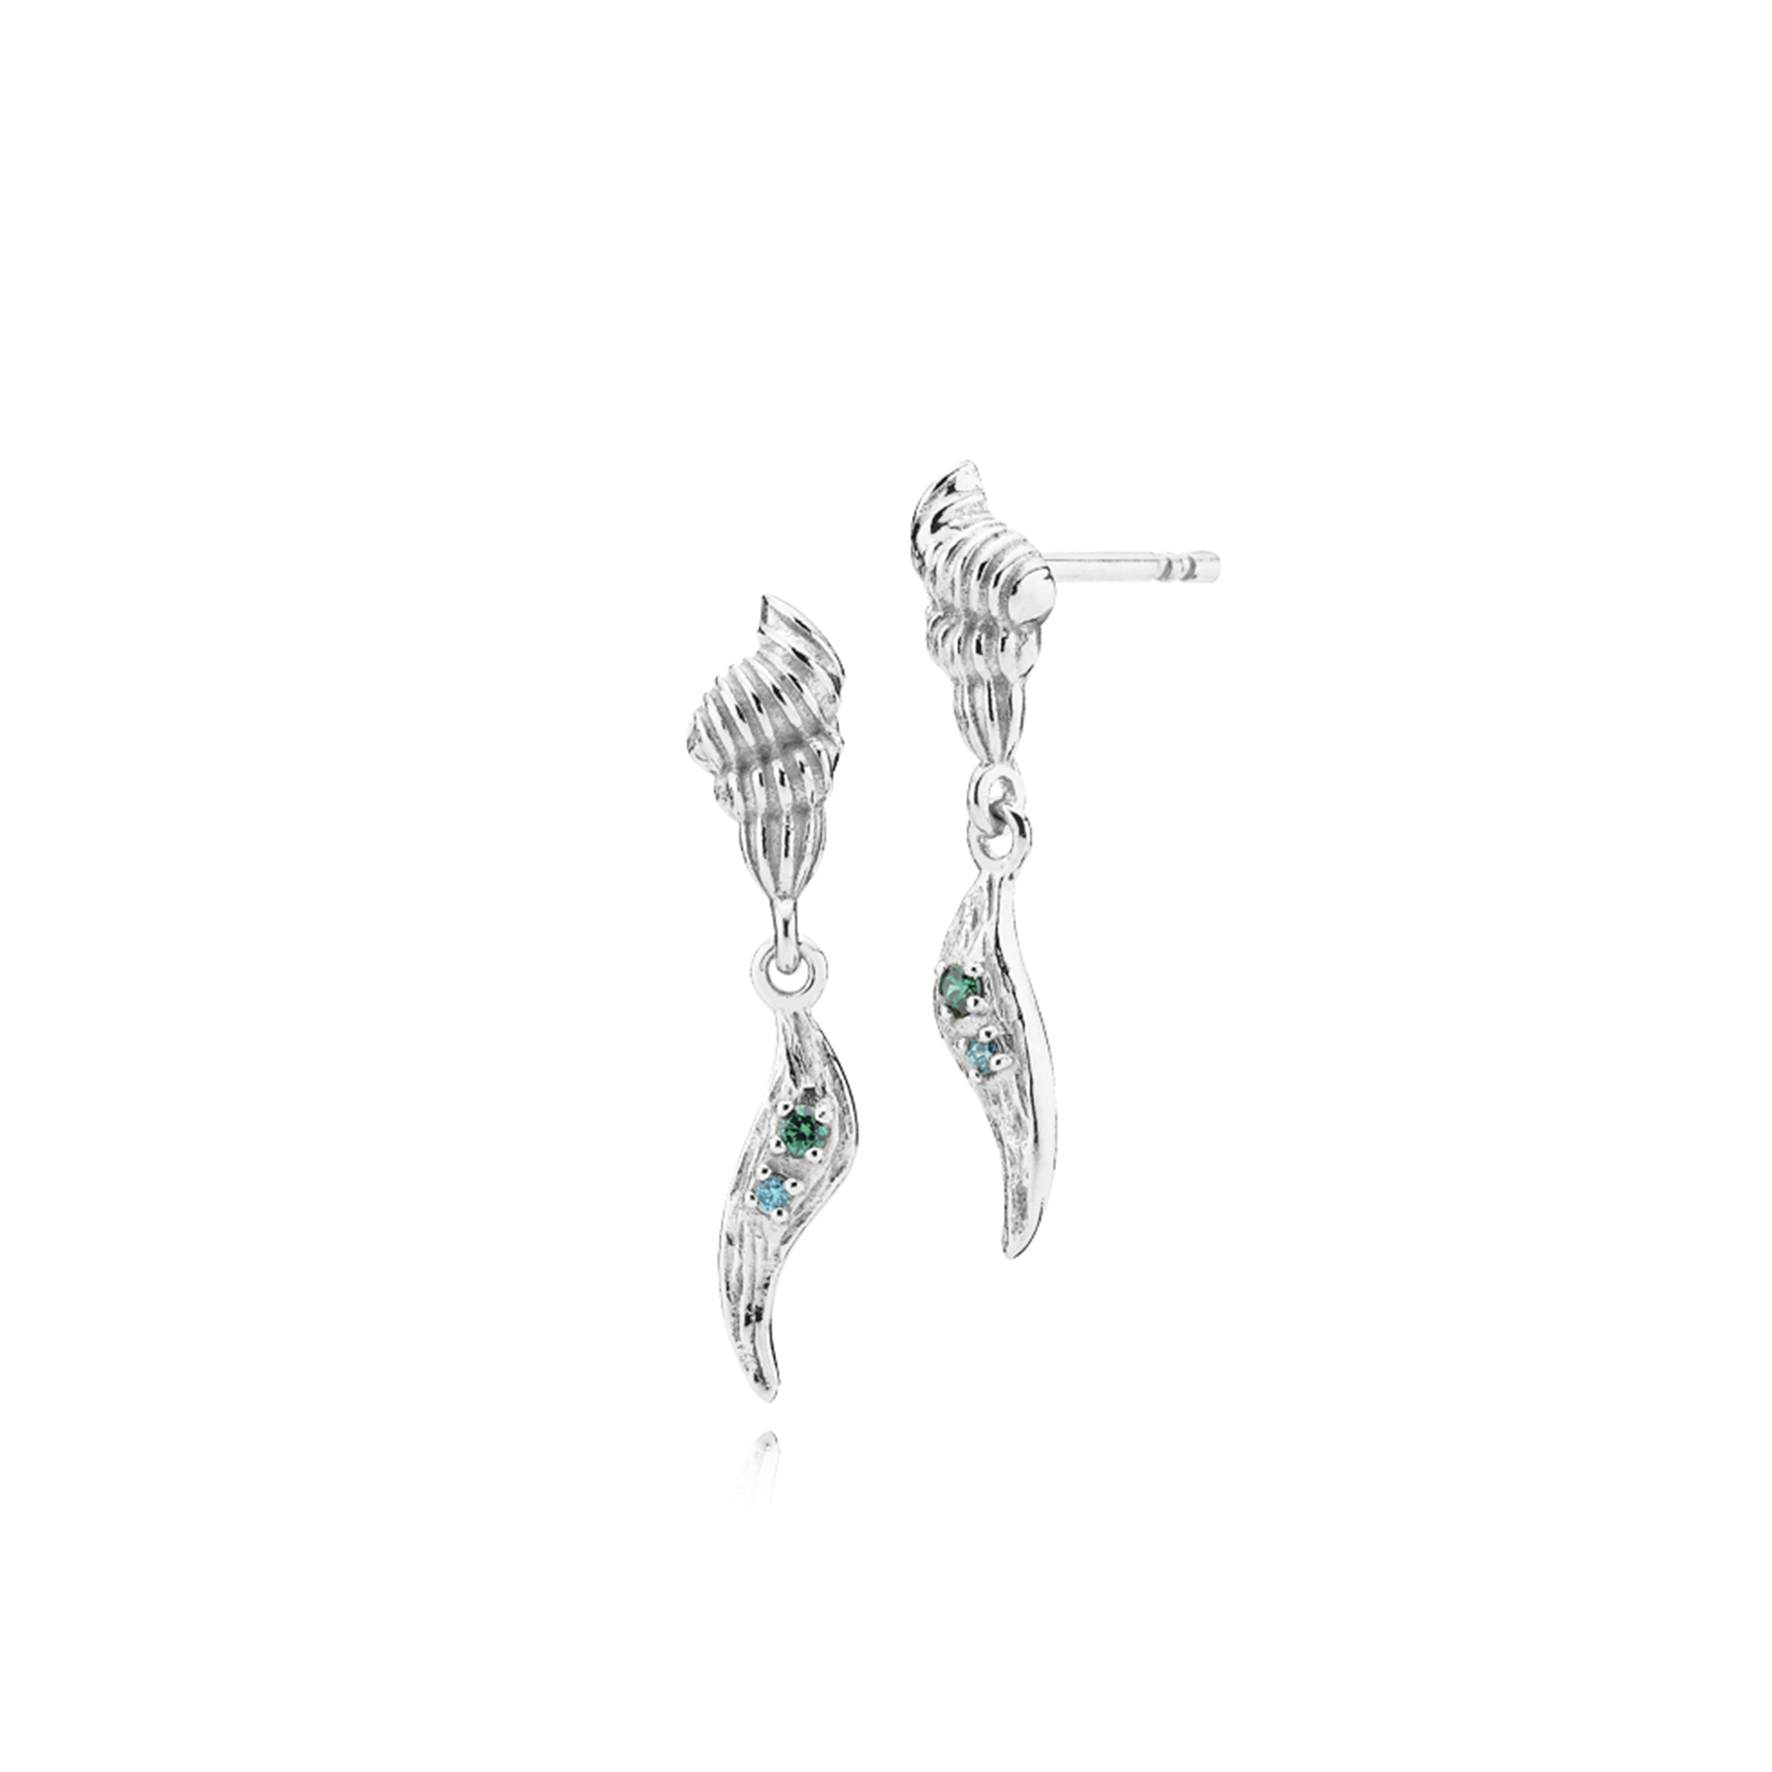 Kaia Earrings Green Onyx and Blue Topas von Sistie in Silber Sterling 925